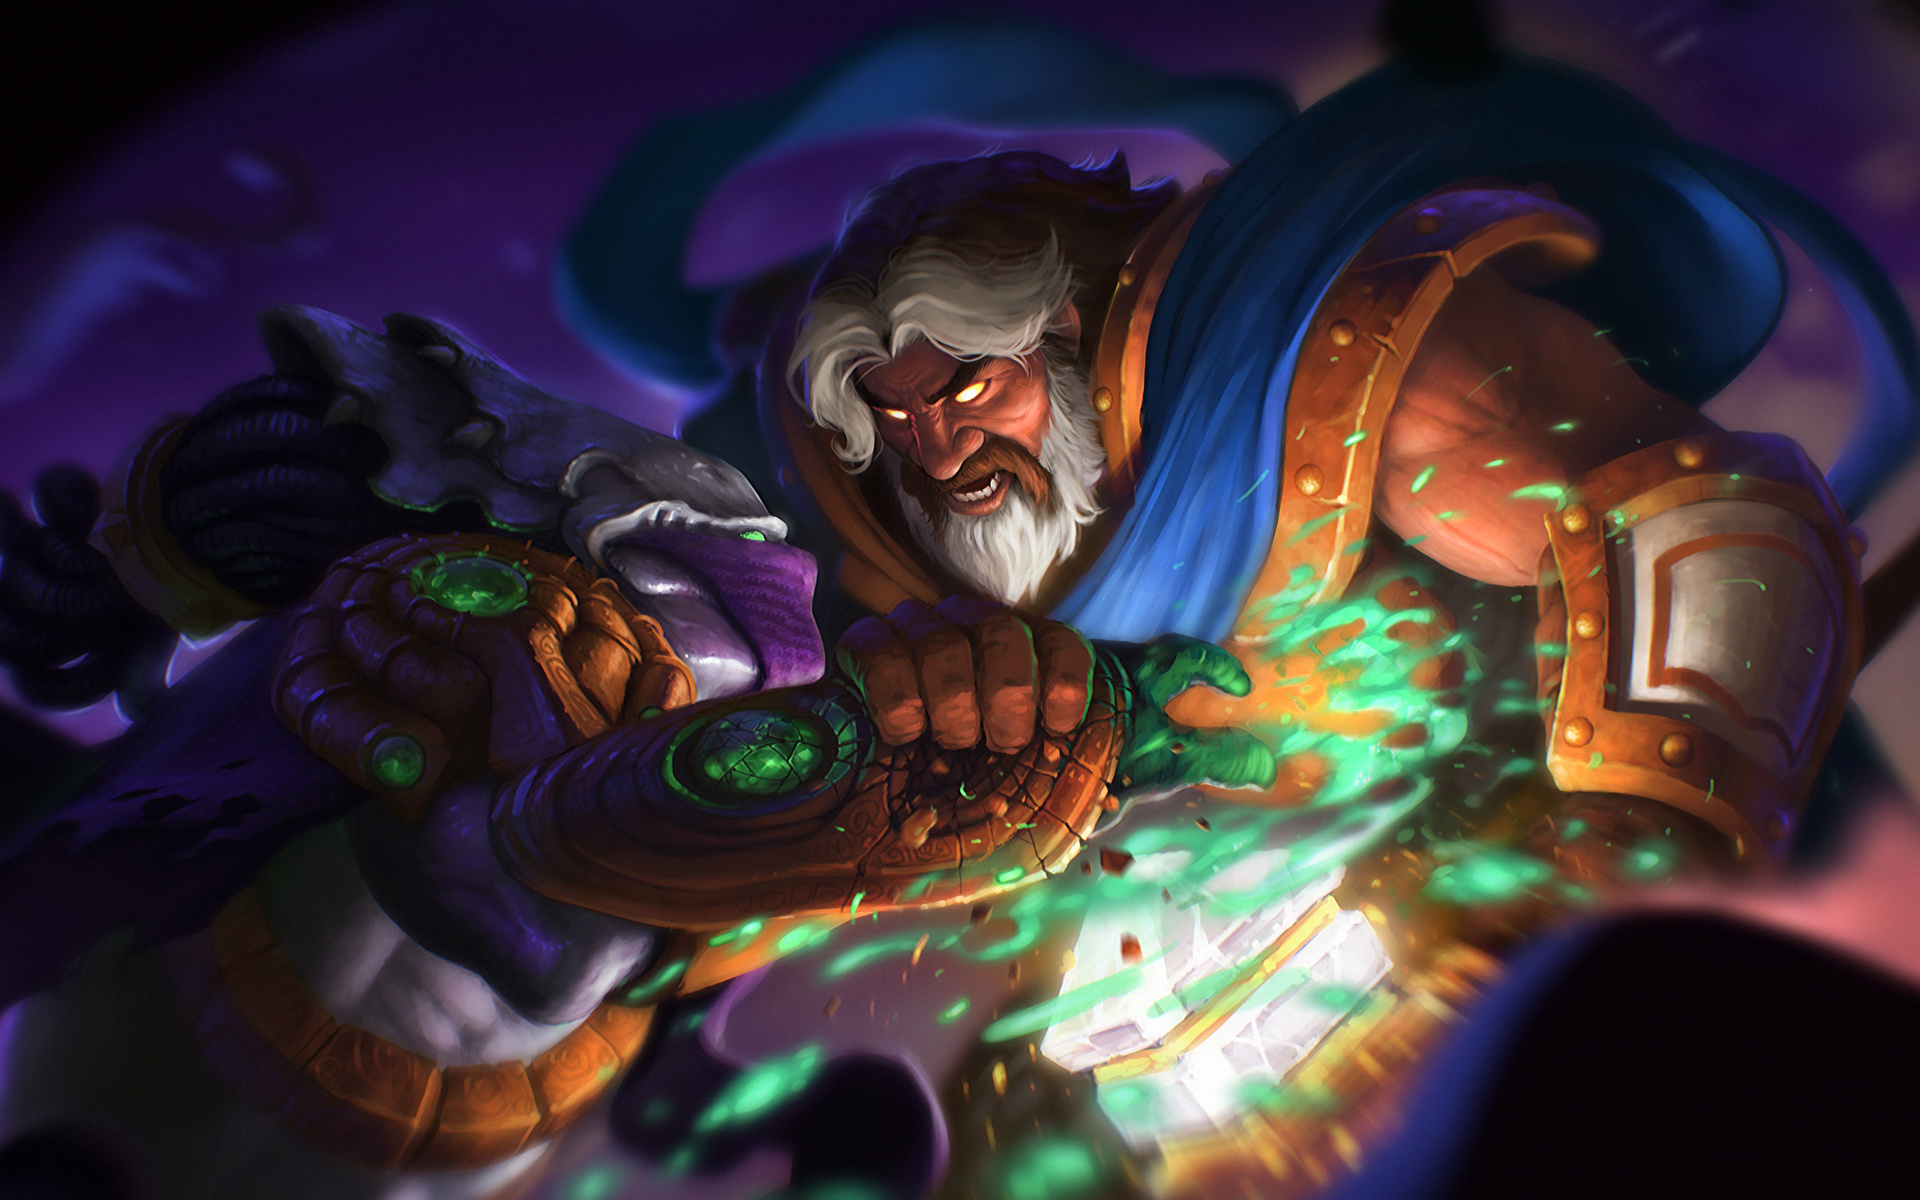 Picture Heroes of the Storm Zeratul, Dark Prelate, Uther, The Lightbringer Fantasy vdeo game 1920x1200 Games